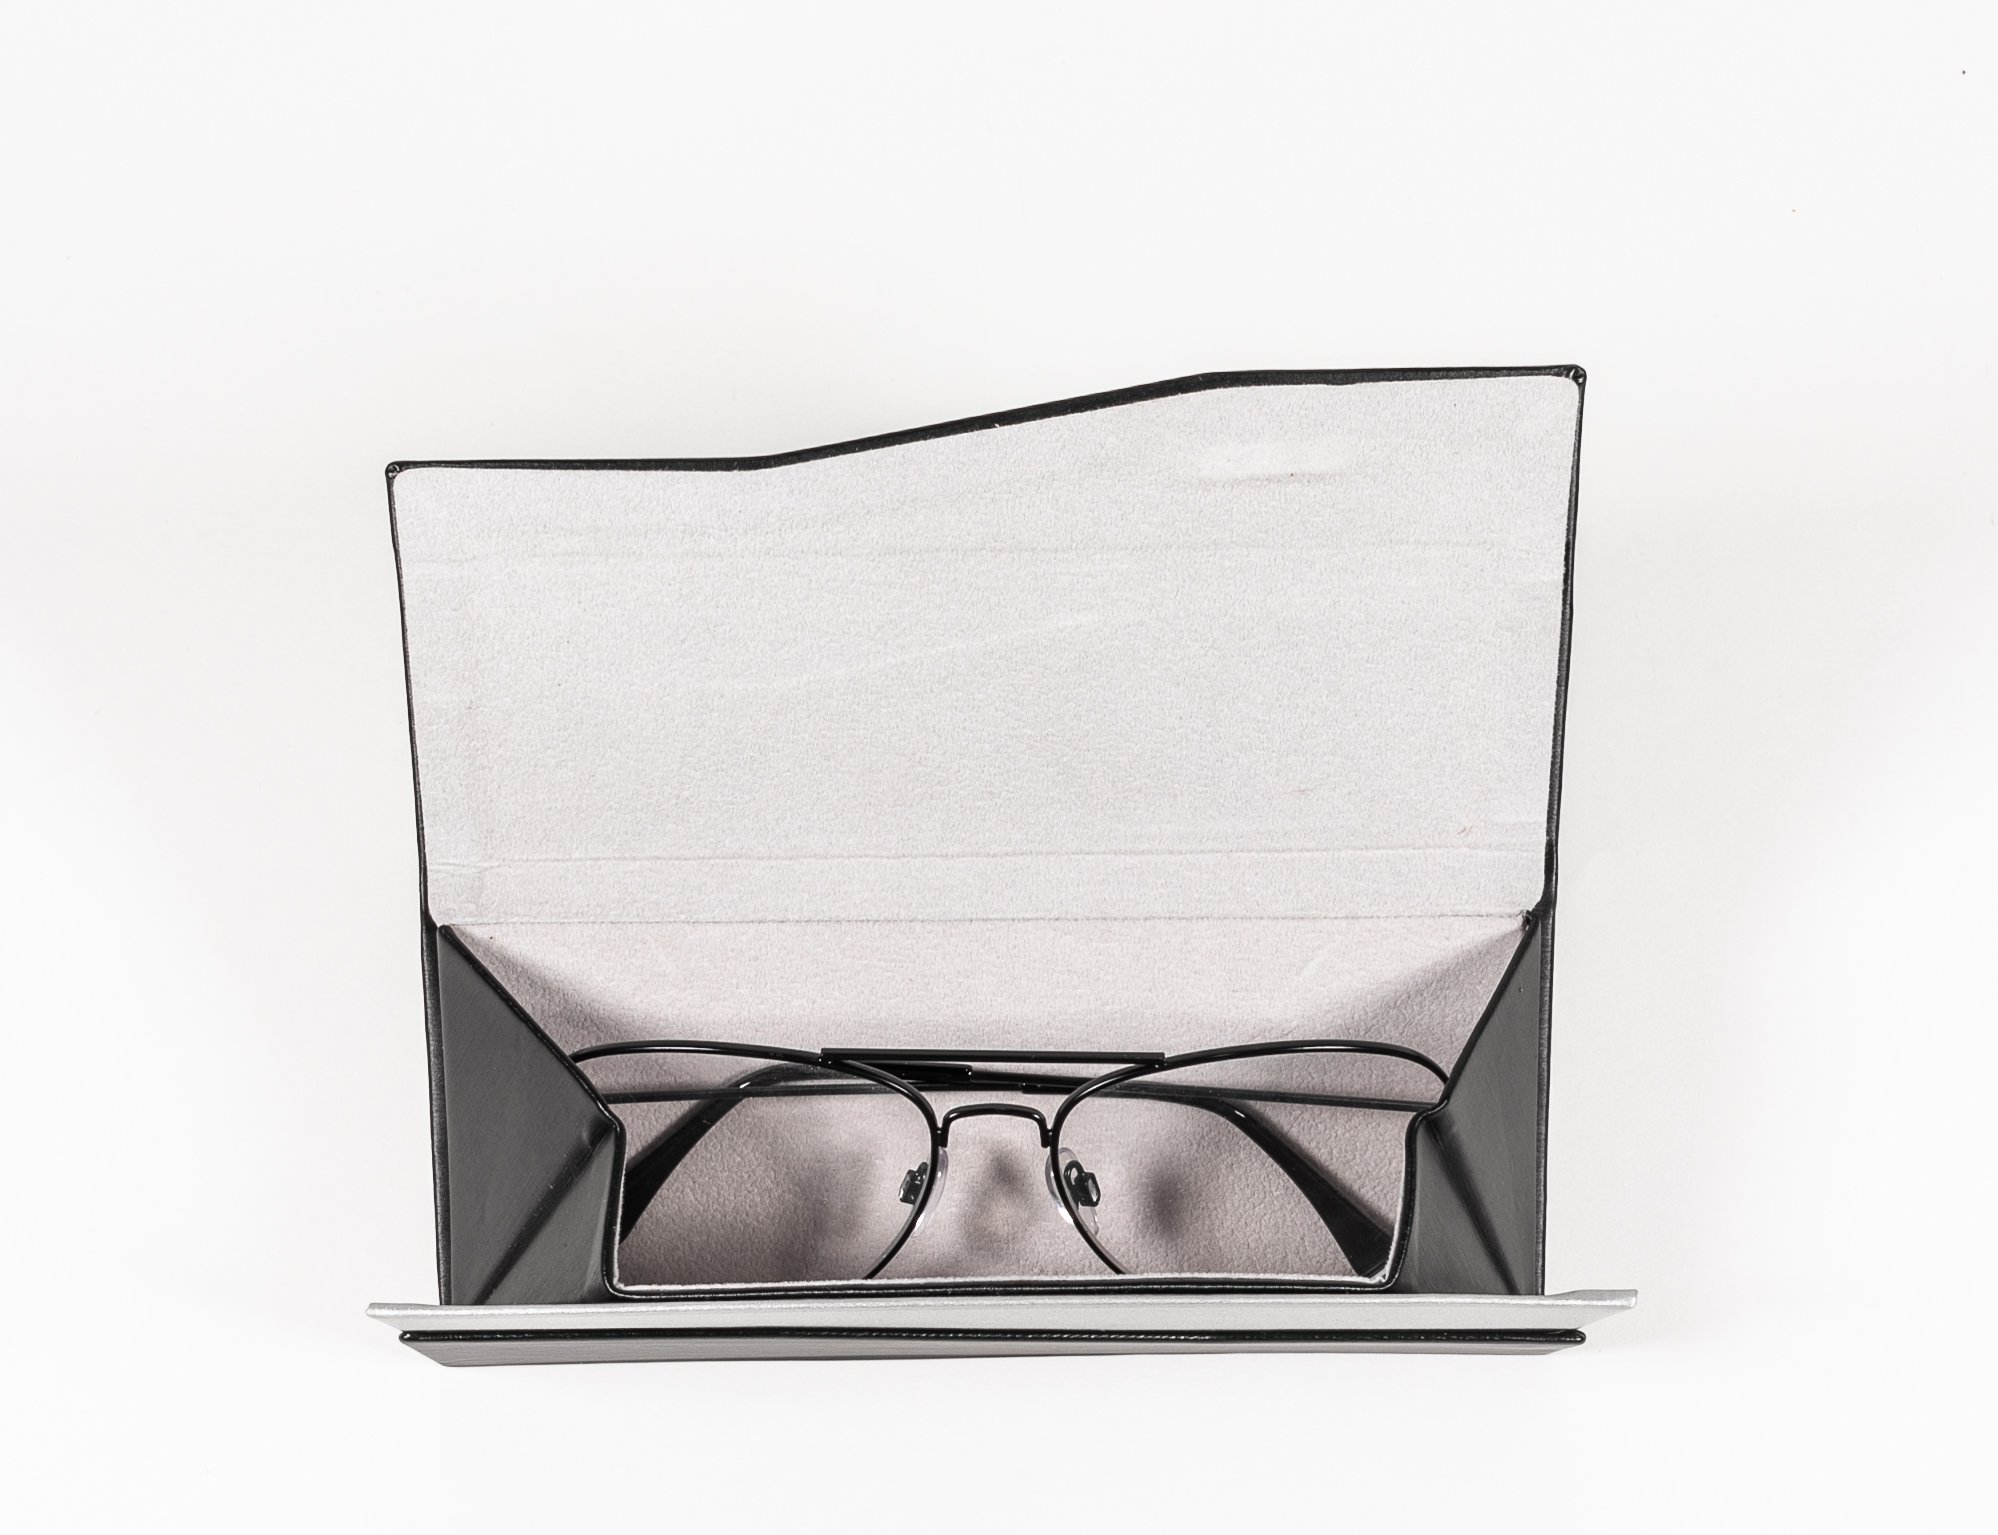 2021 Sunglasses, Black, Detachable, Hand-made Glasses Case with Triangular Appearance